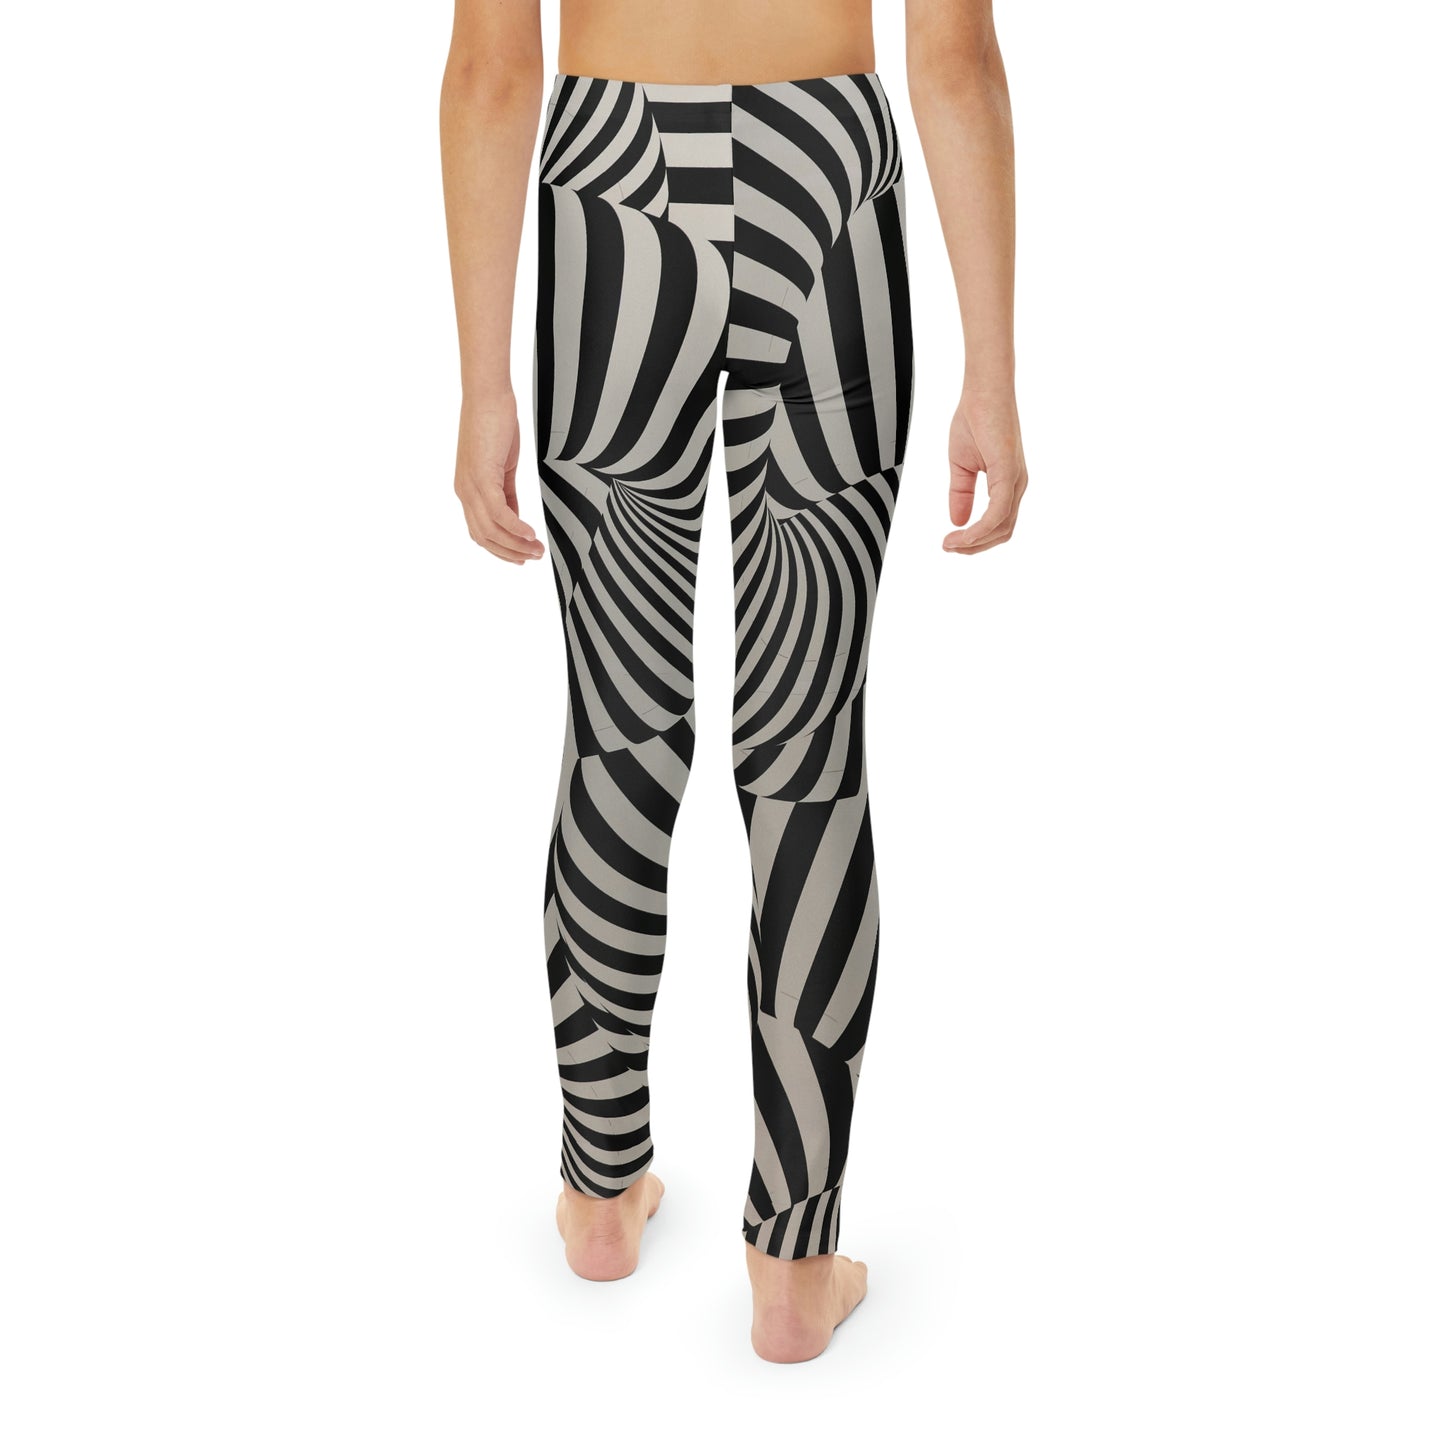 Zebra Print animal kingdom, Safari Youth Leggings, One of a Kind Gift - Unique Workout Activewear tights for kids, Daughter, Niece Christmas Gift